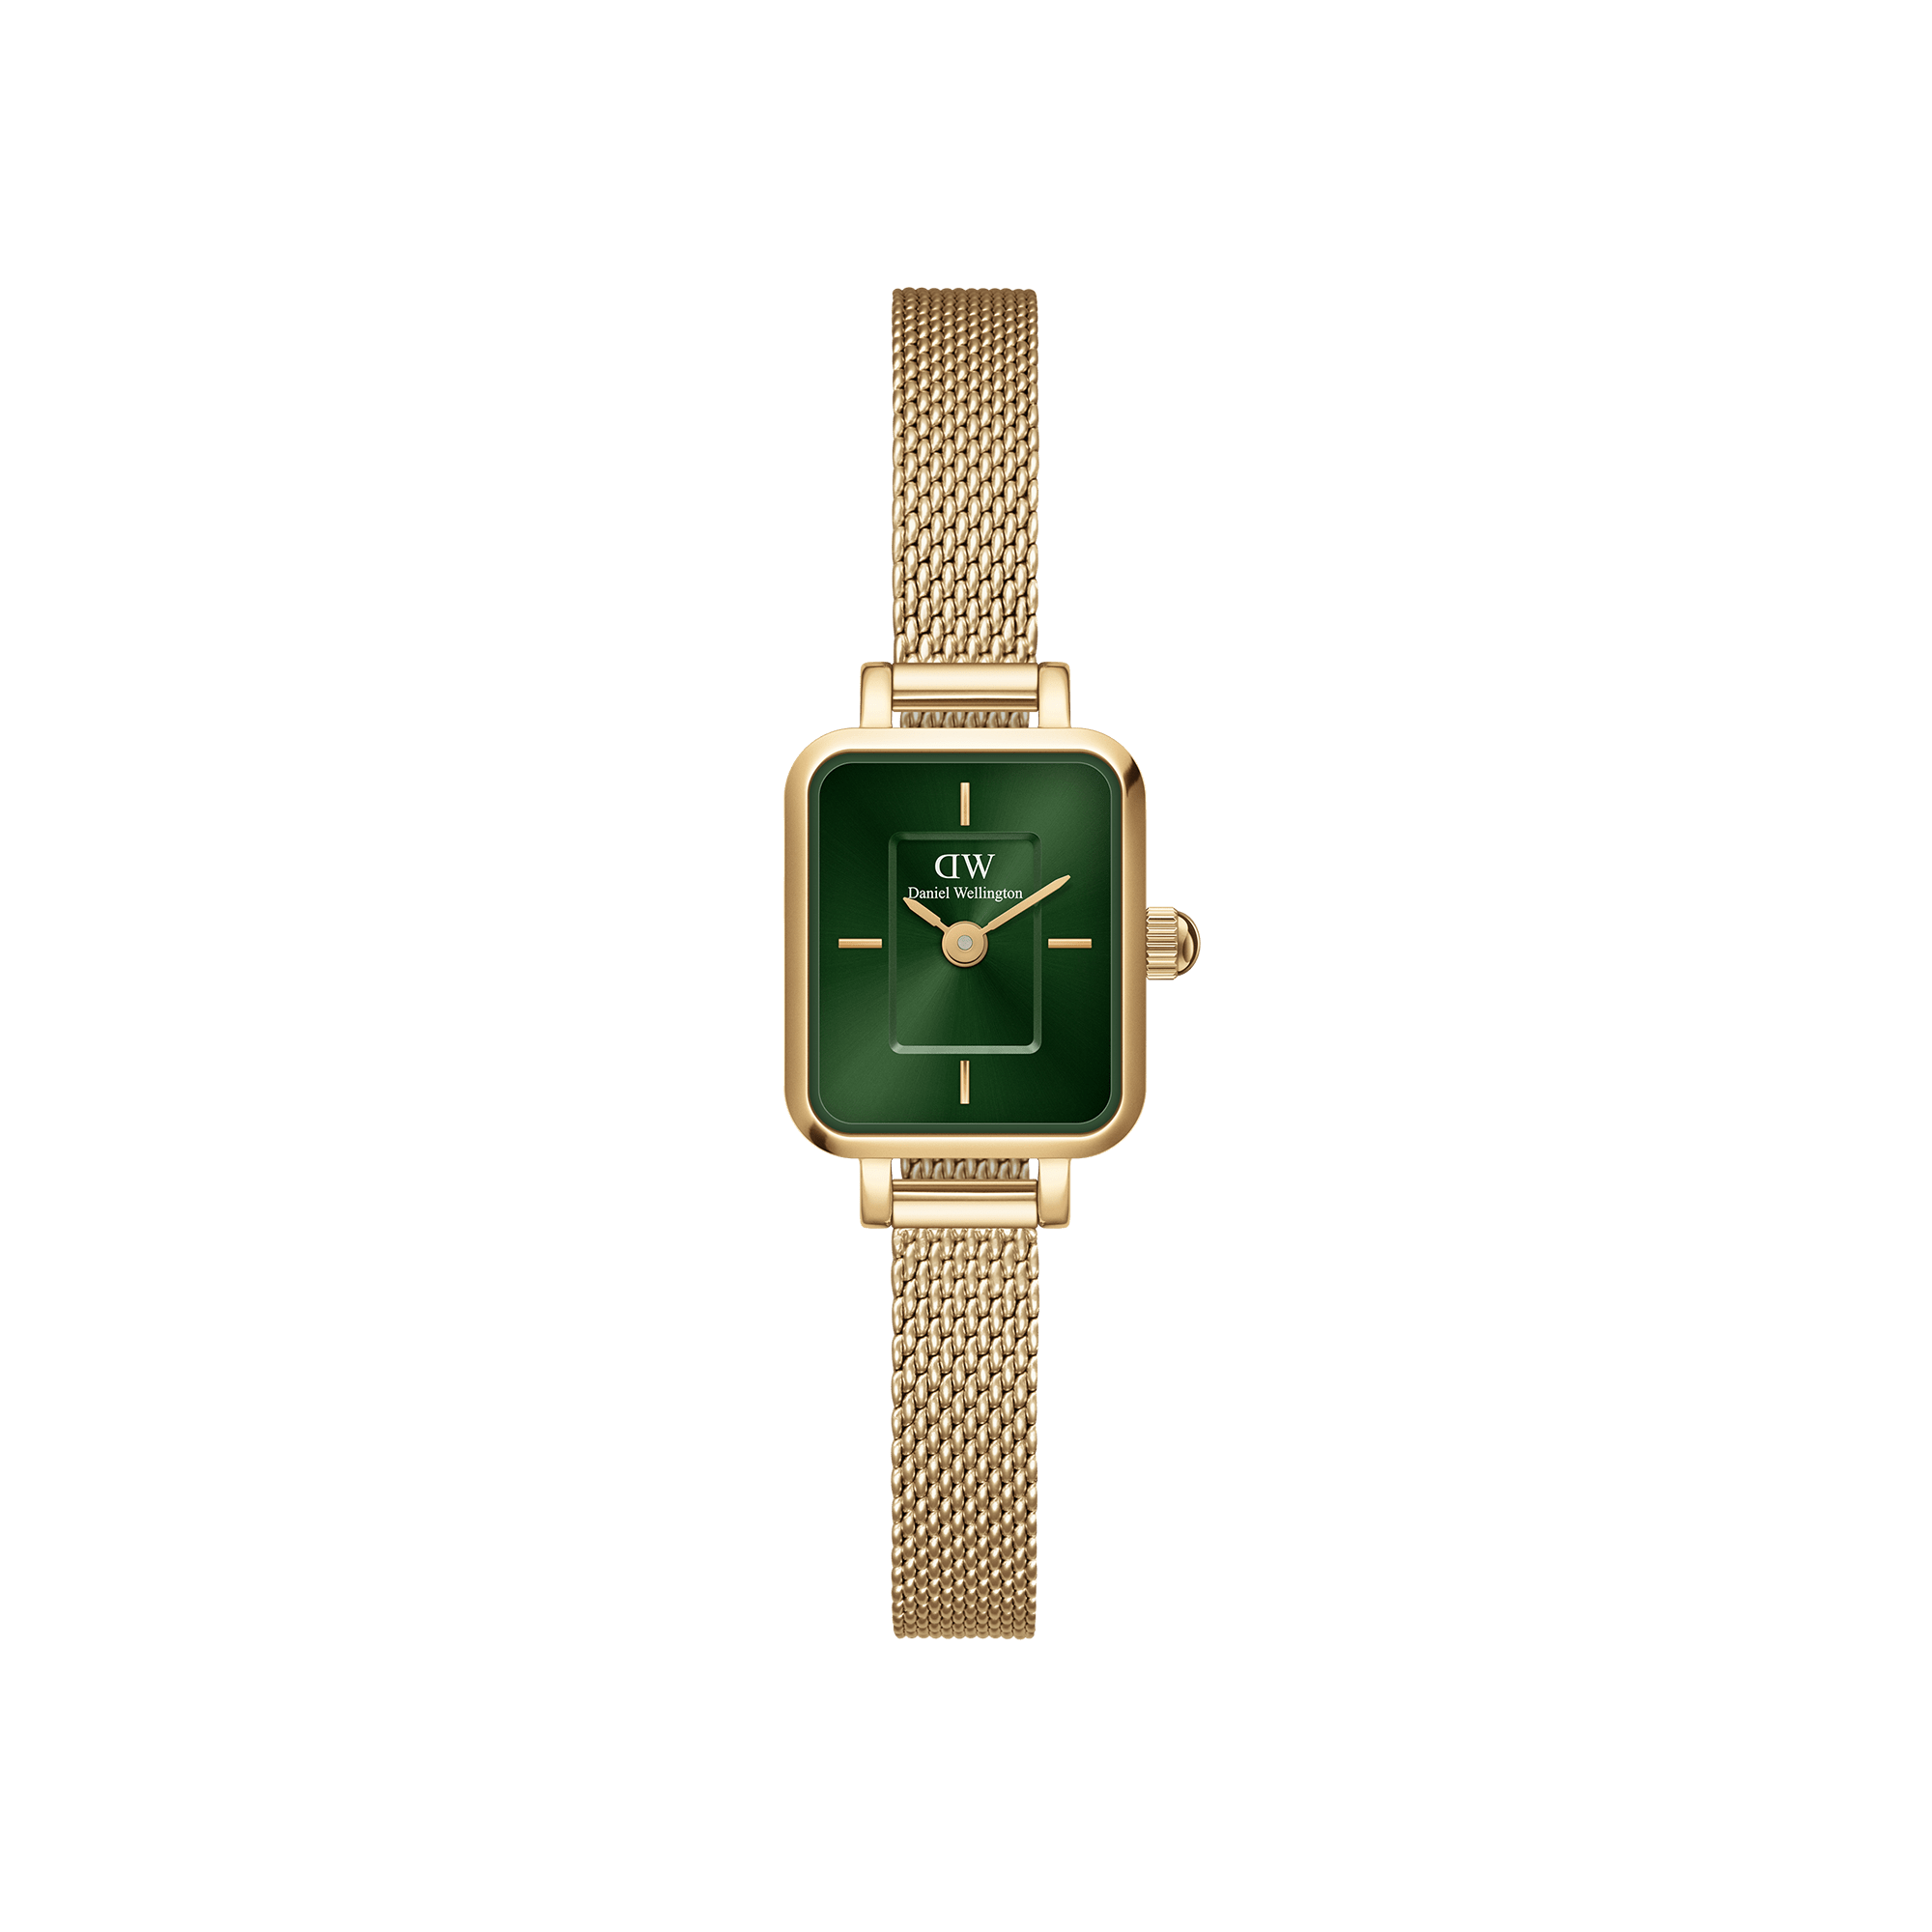 Audemars Piguet Fully Iced Out With Emerald Cut Diamonds – Haimov Jewelers